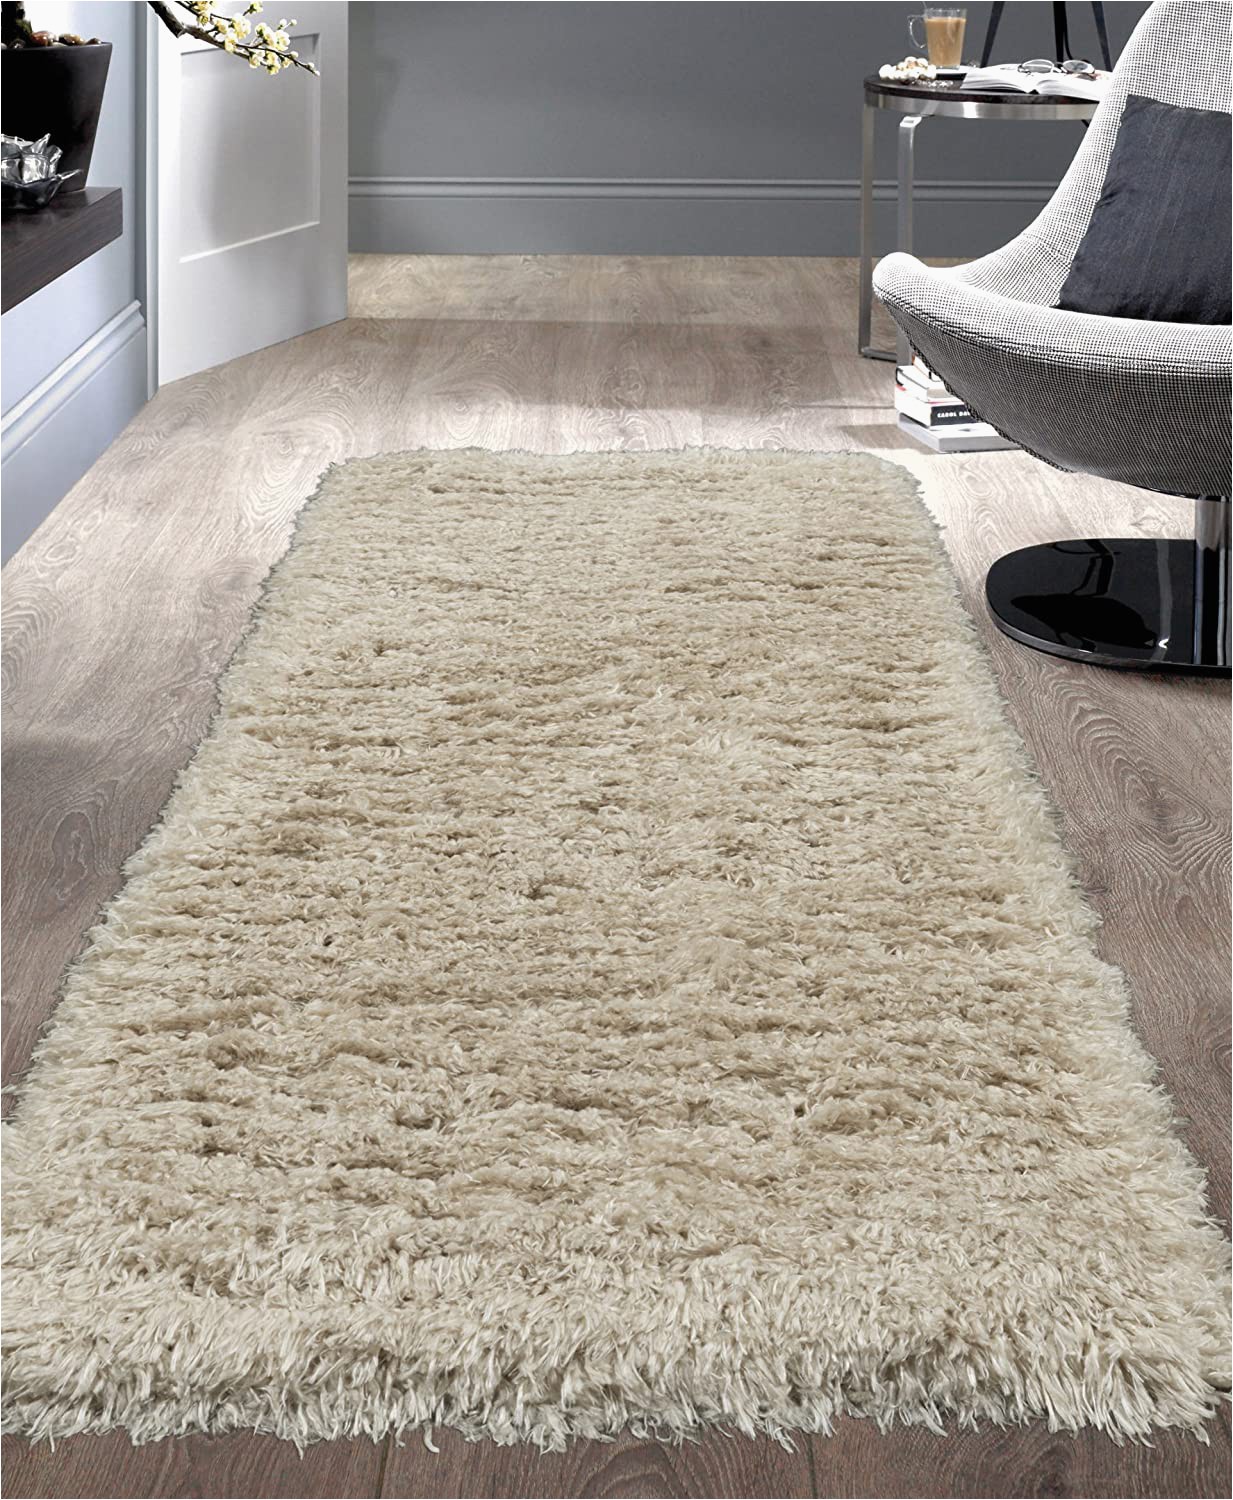 Prevent area Rugs From Slipping Non Slip Washable area Rug Pad Indoor Rug Pad Use On All